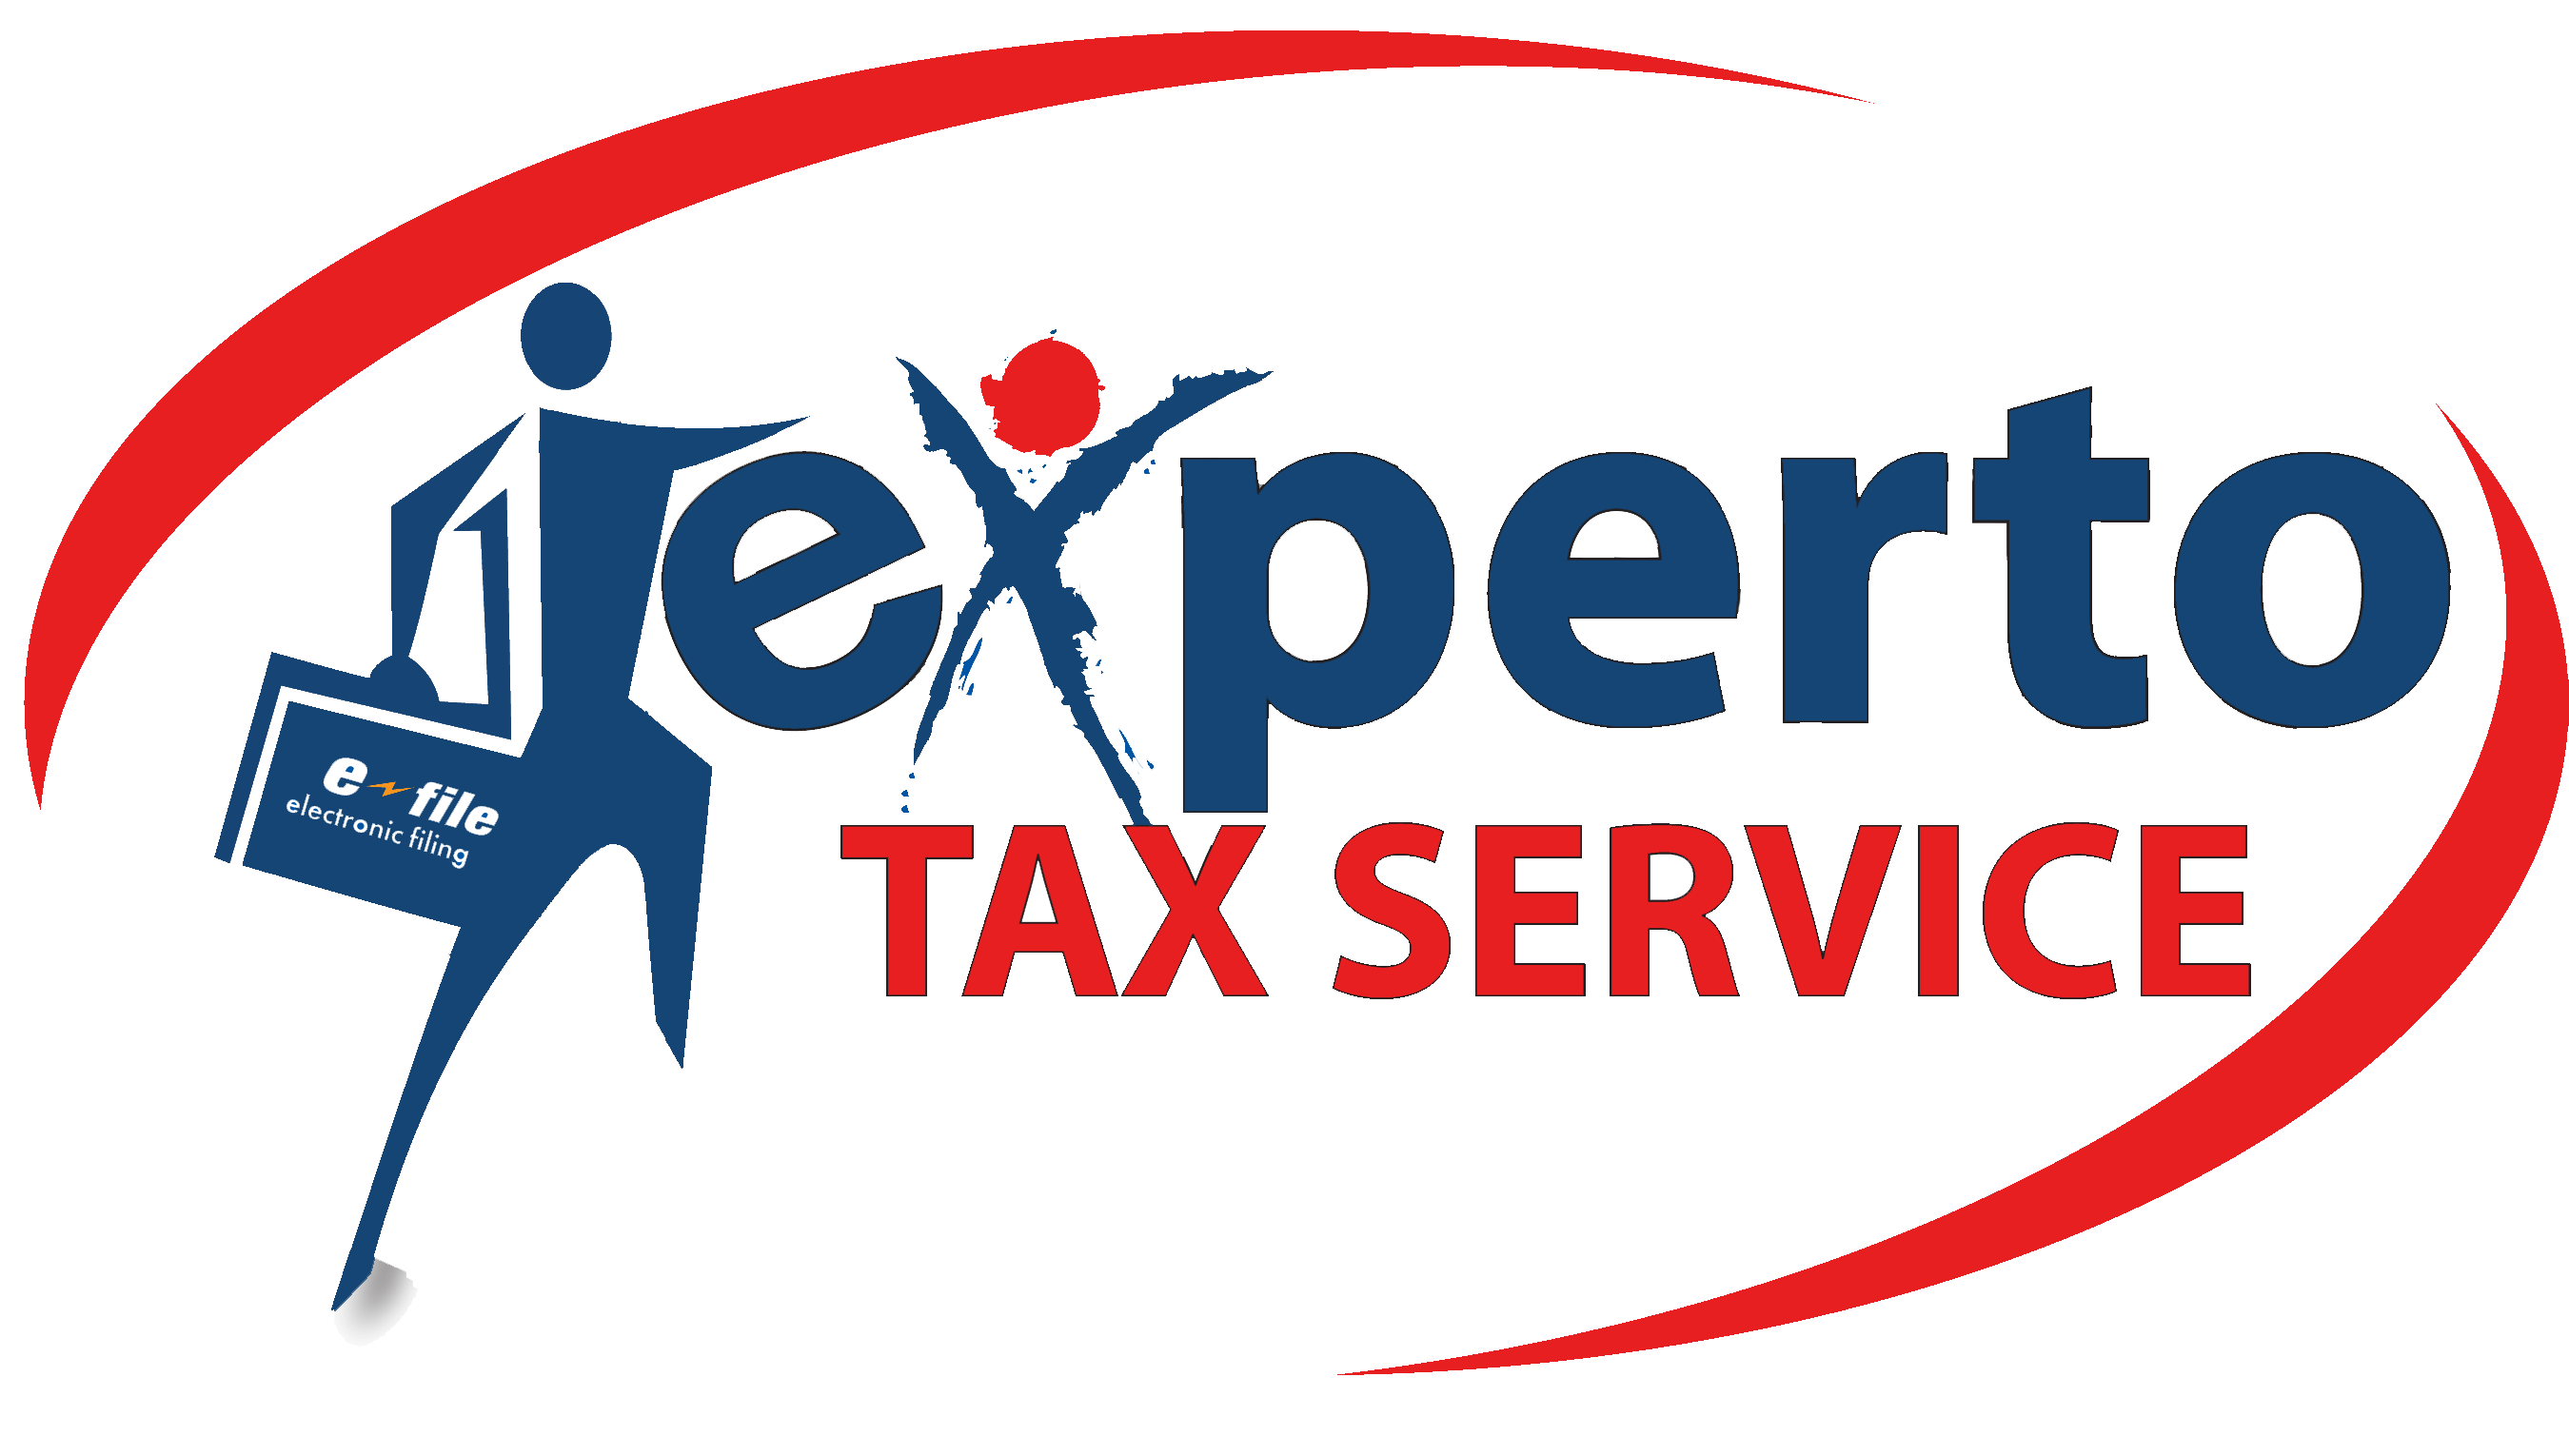 Experto Tax Service – Tax Preparation – Business Services – Incorporation – Bookkeeping – Payroll – Accounting.